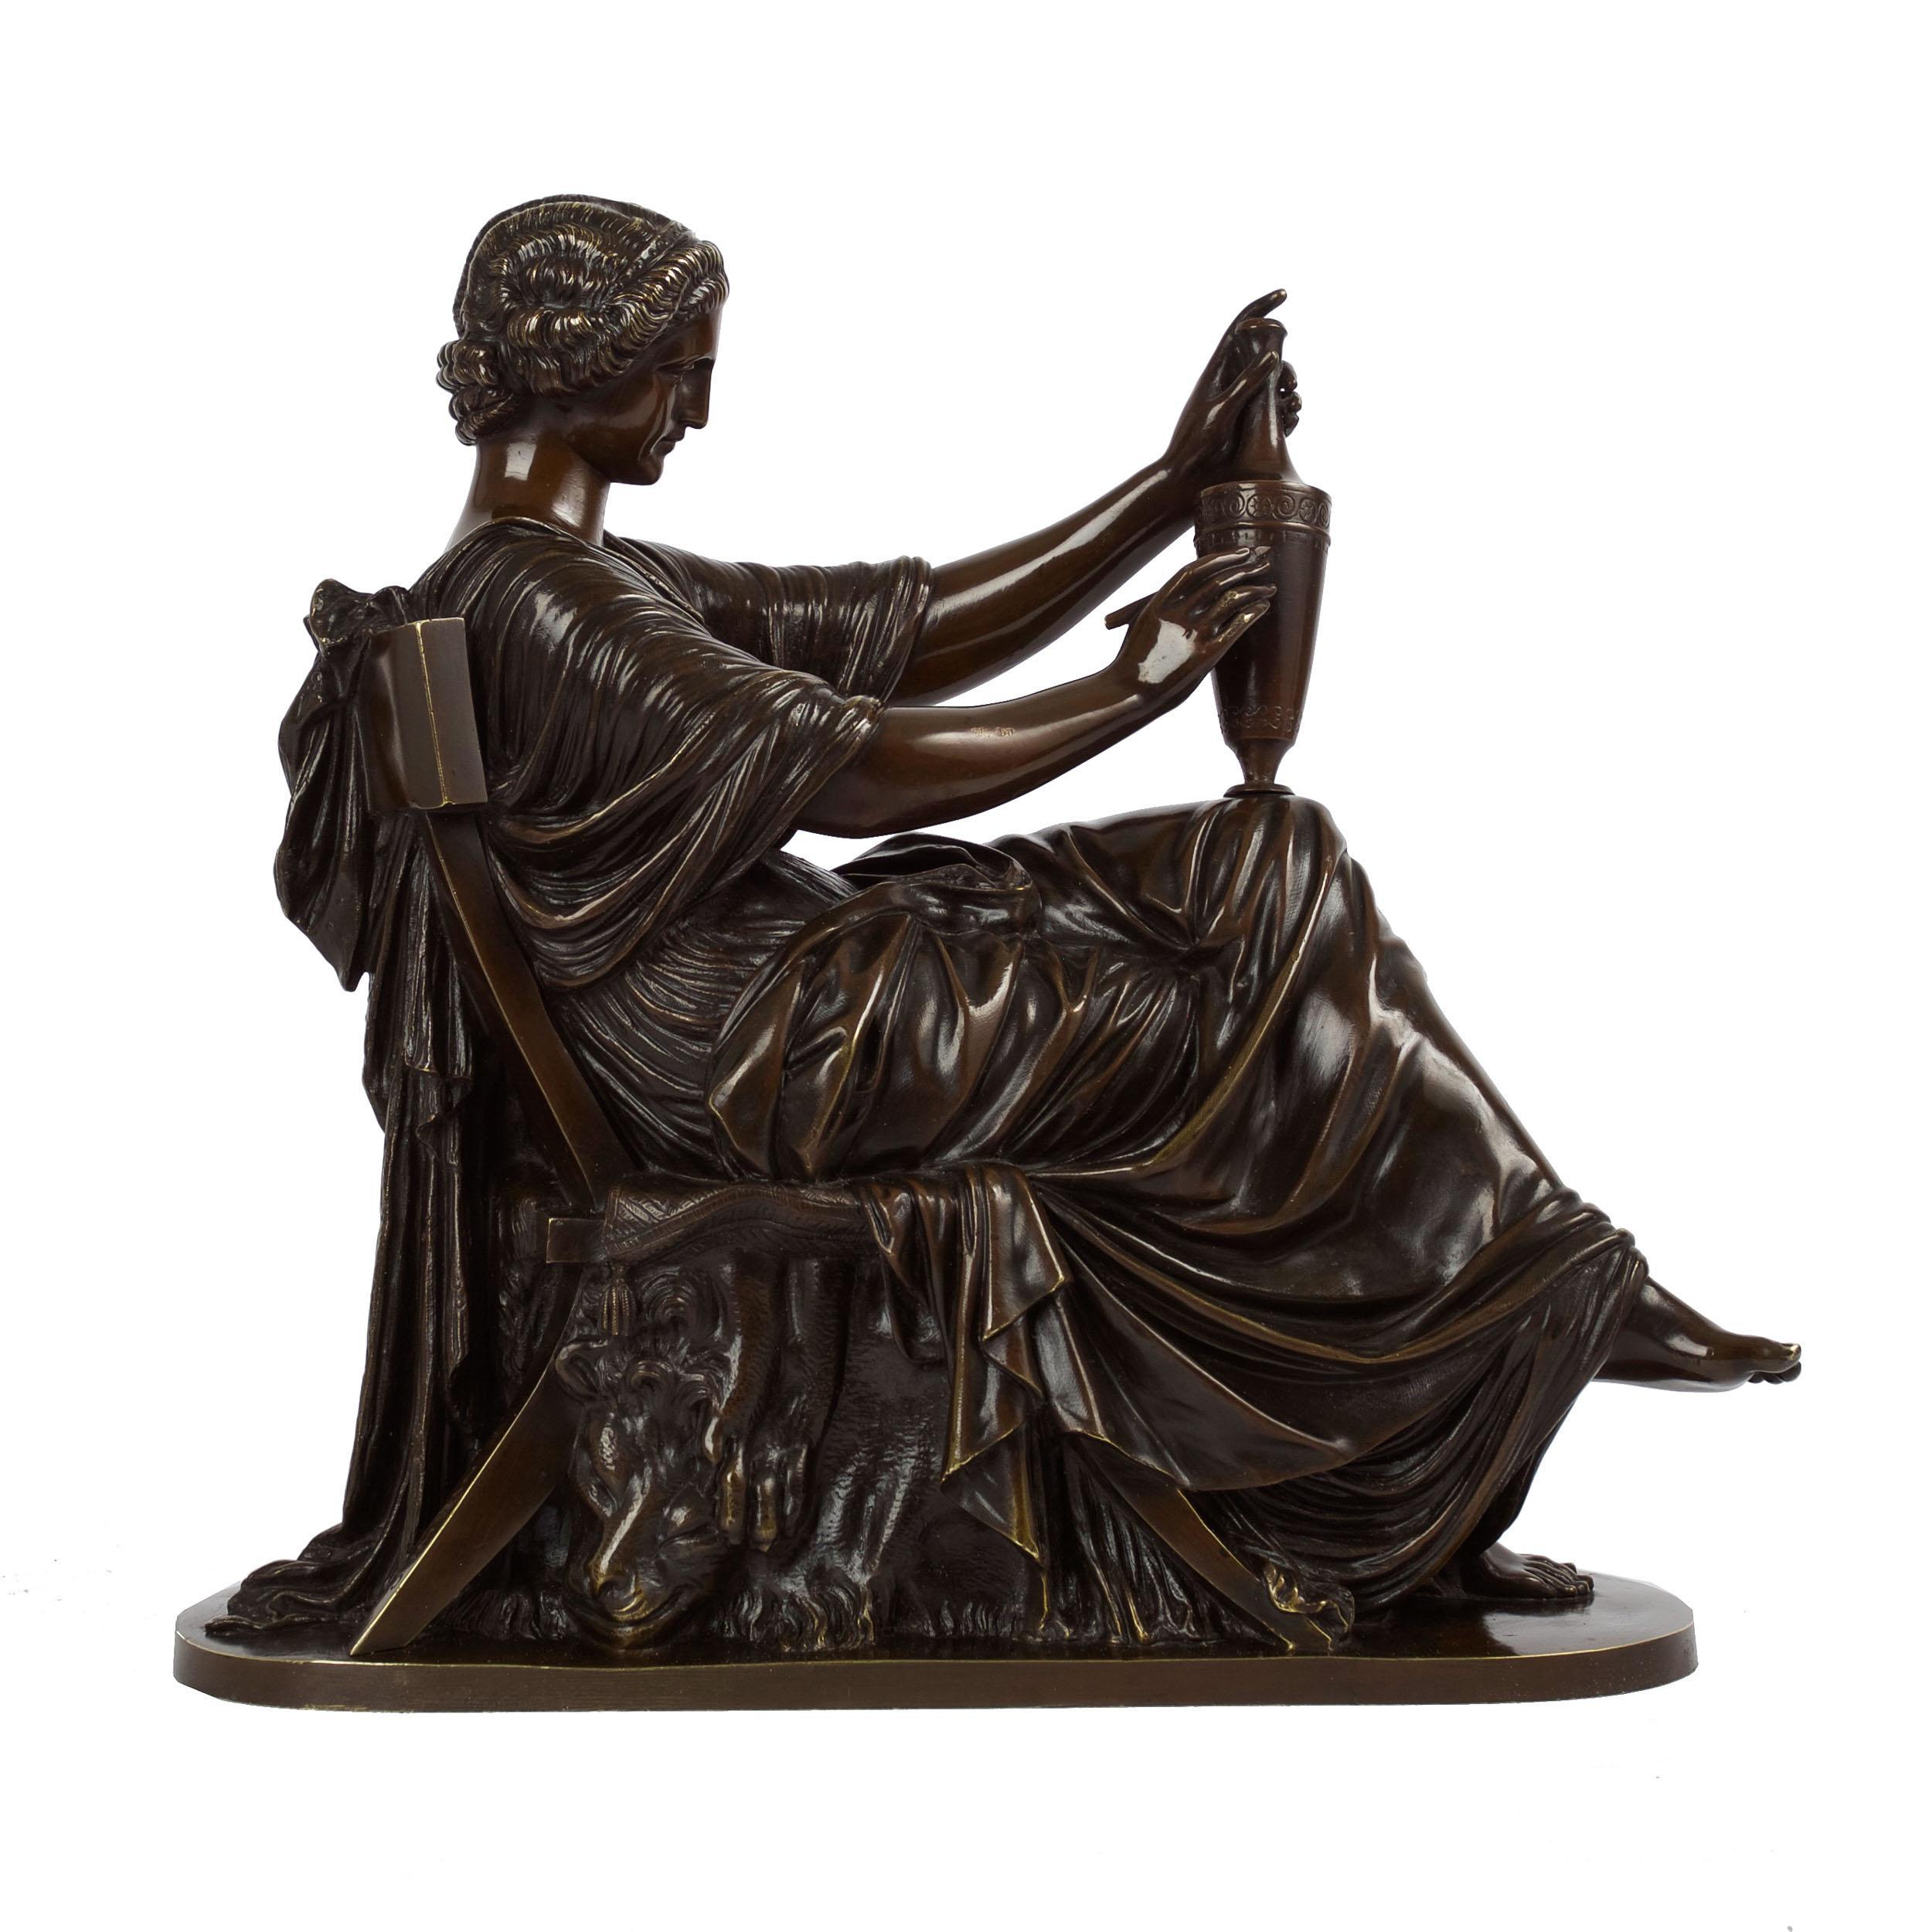 Originally exhibited in plaster at the Salon of 1857 (no. 3102), it was again exhibited at the Salon of 1861 (no. 3616) in marble with the title L'Art Étrusque. The original was acquired by the French government for 7,000 francs and was subsequently